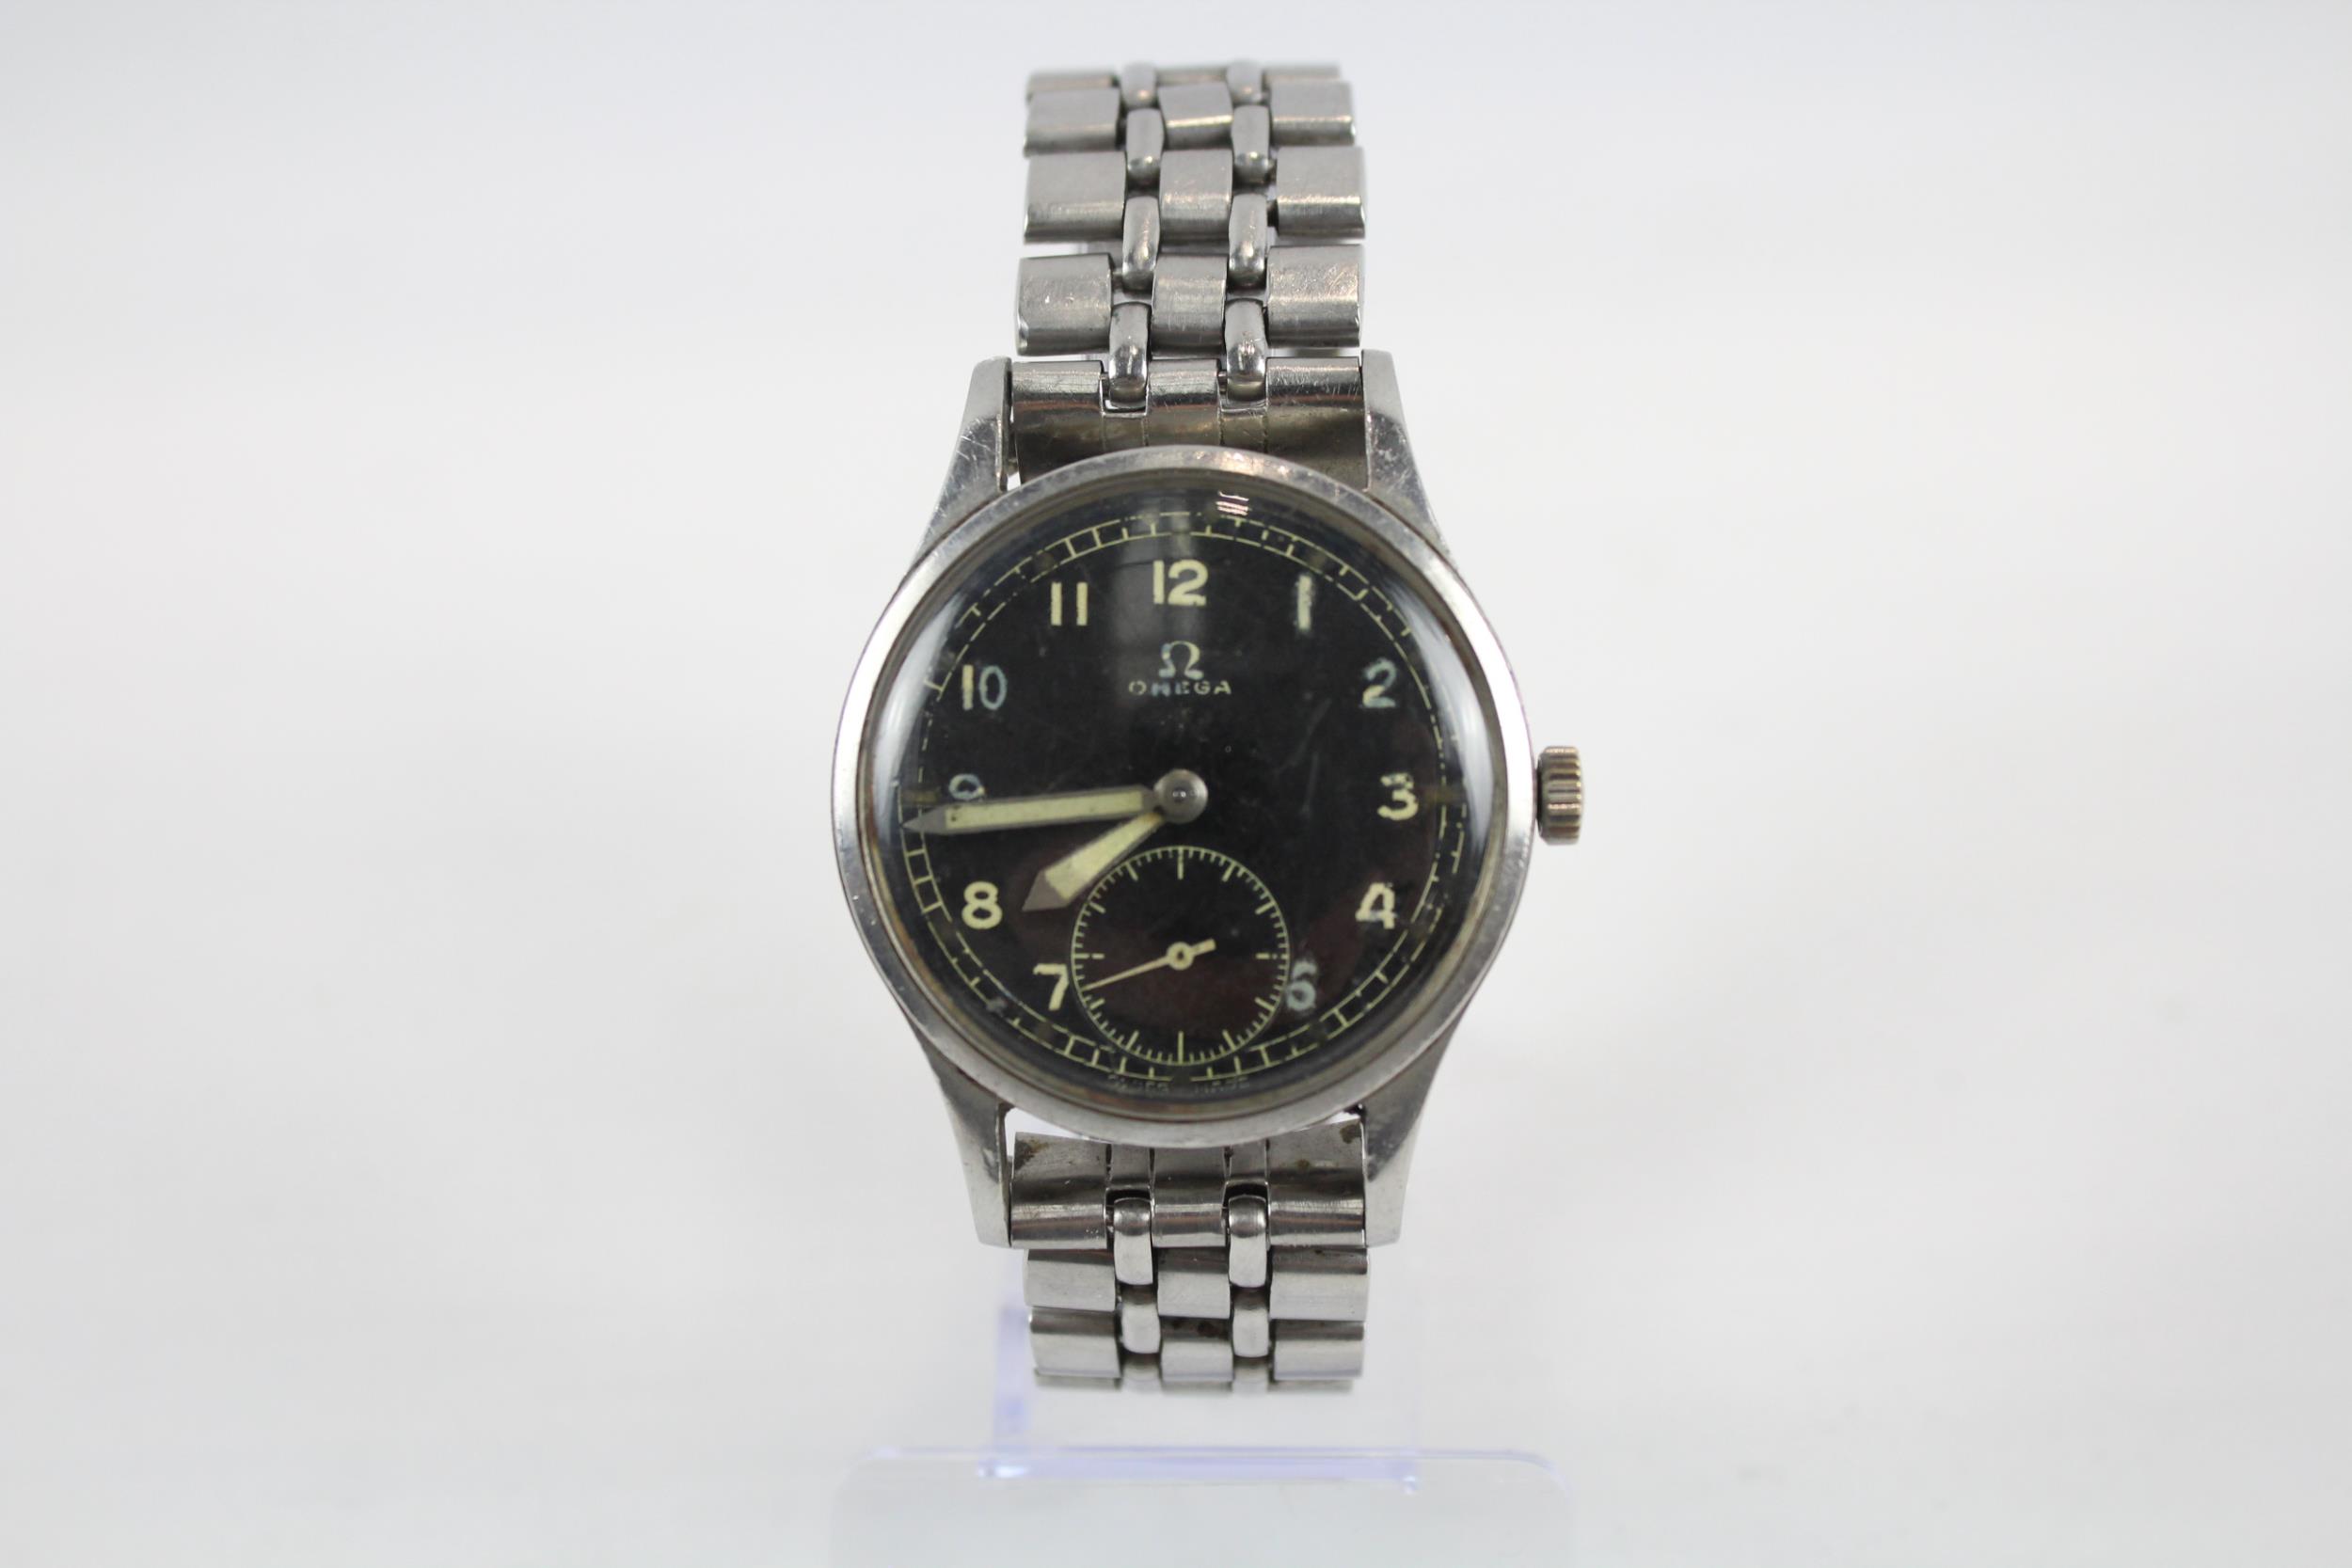 OMEGA DIRTY DOZEN Gents Military Issued WRISTWATCH Hand-wind // OMEGA DIRTY DOZEN Gents Military - Image 2 of 6